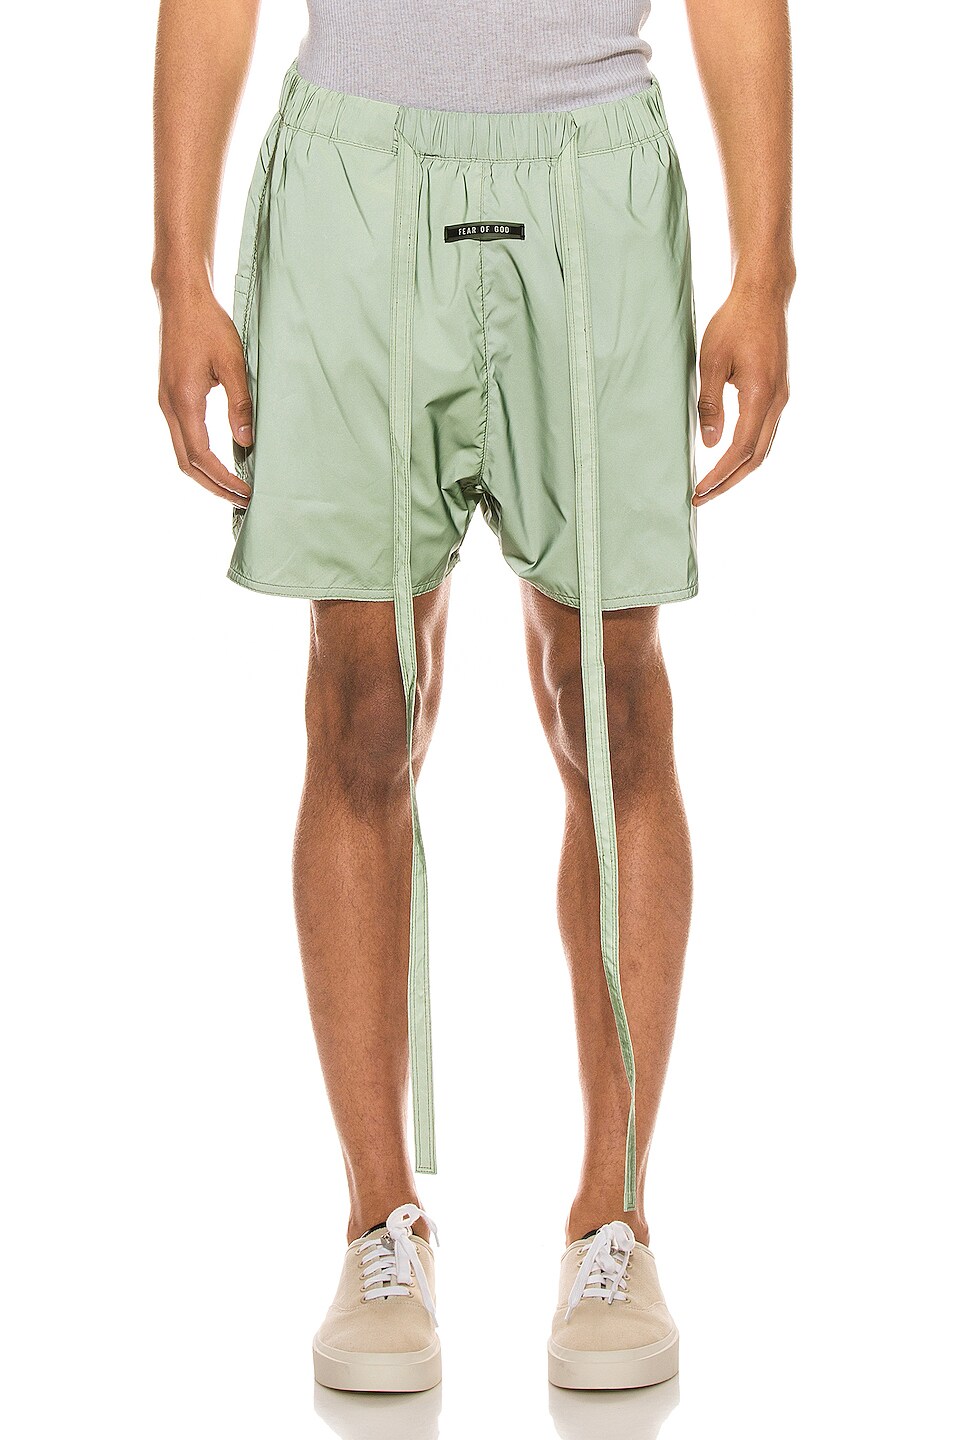 Image 1 of Fear of God Military Physical Training Short in Army Iridescent